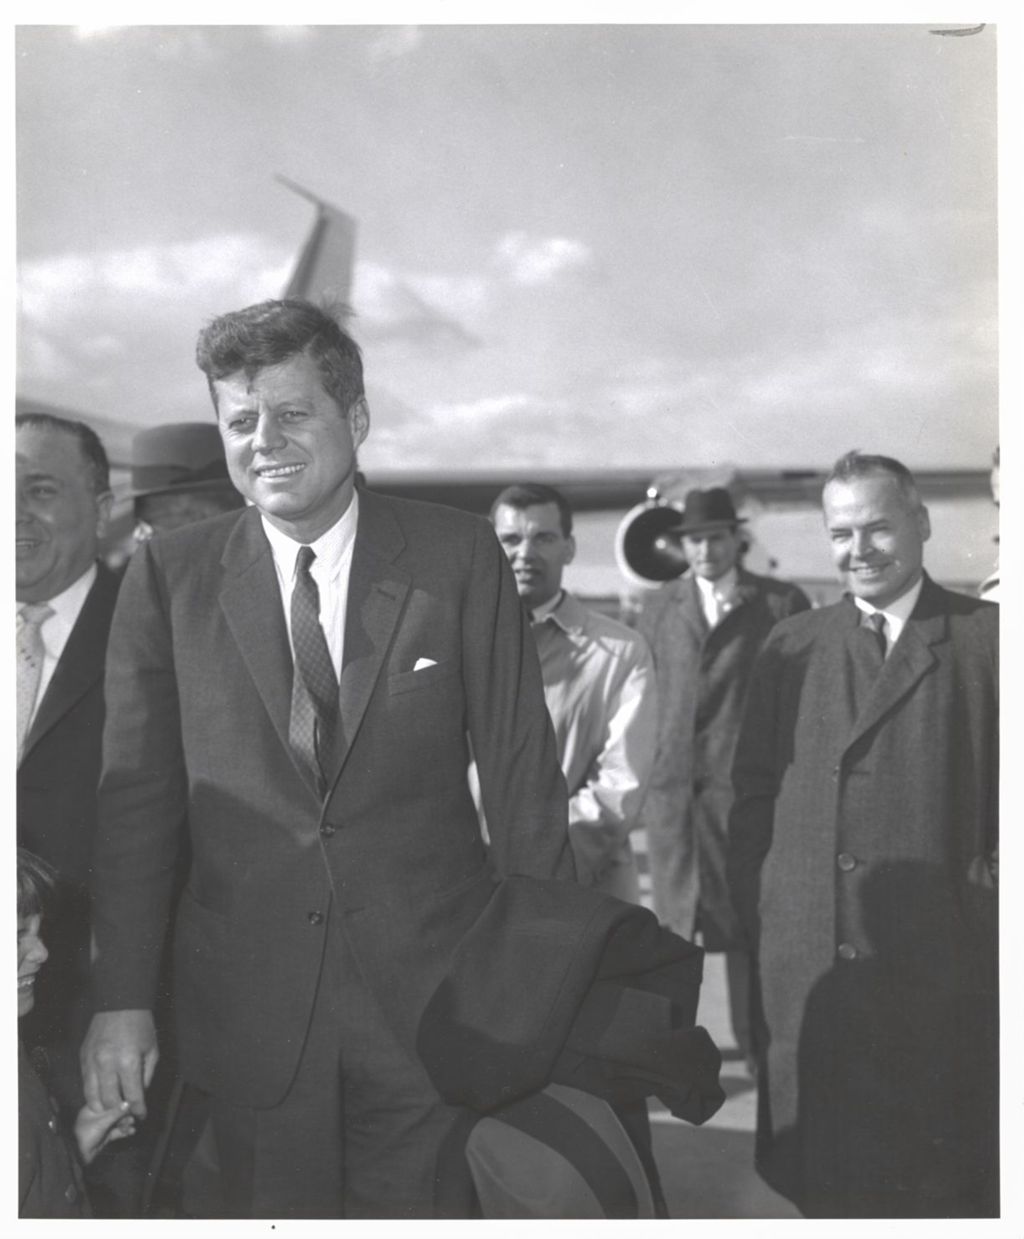 John F. Kennedy at the airport in Chicago